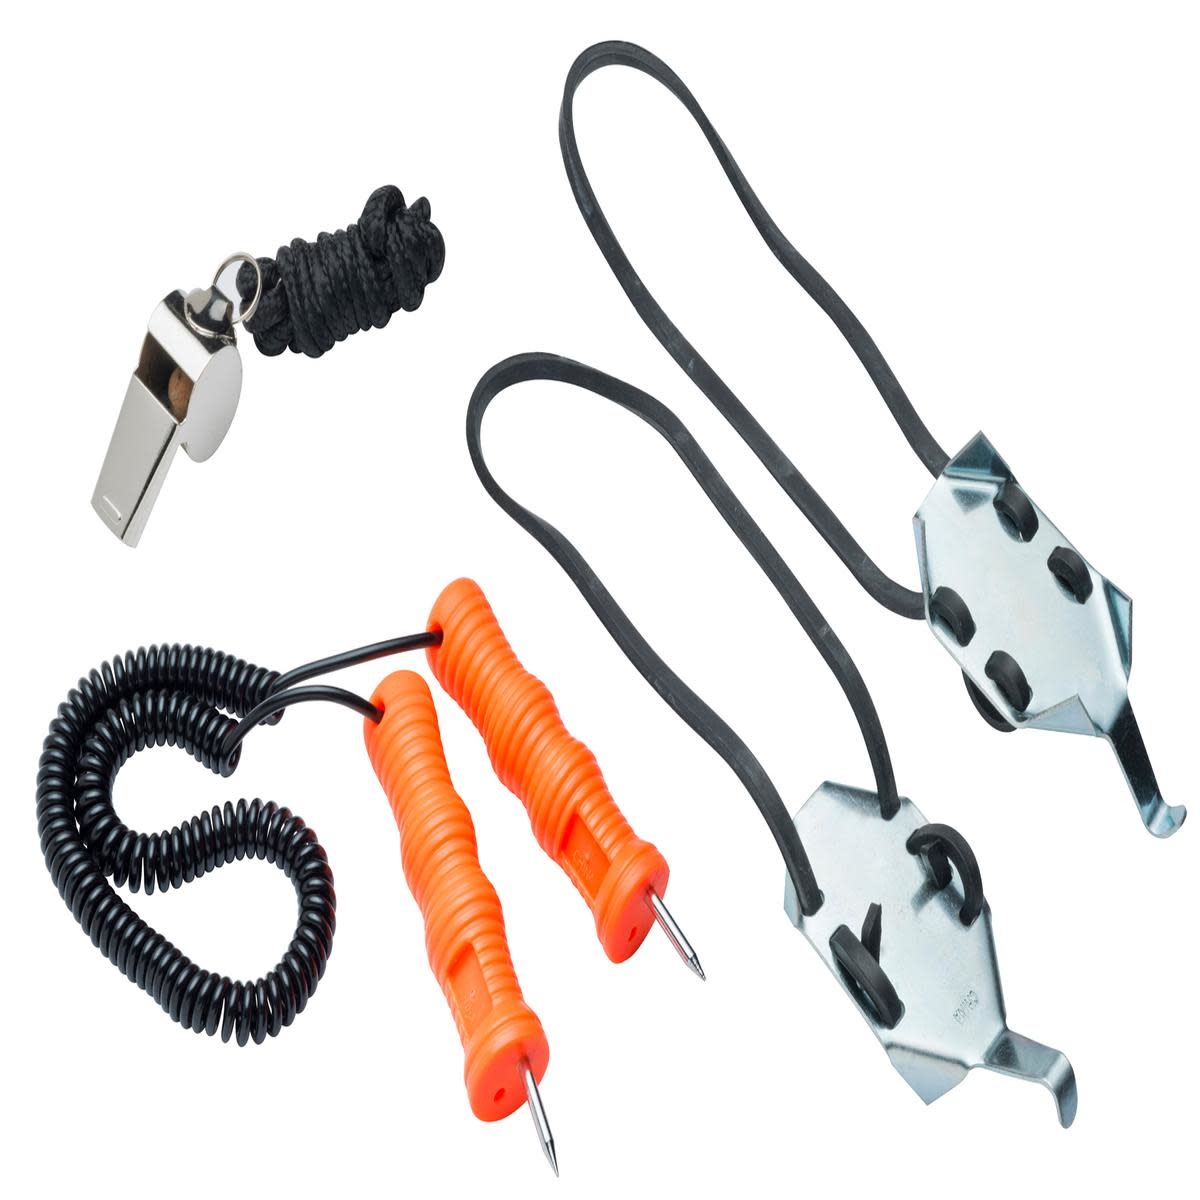 Ice Safety Kit - Backcountry Supplies